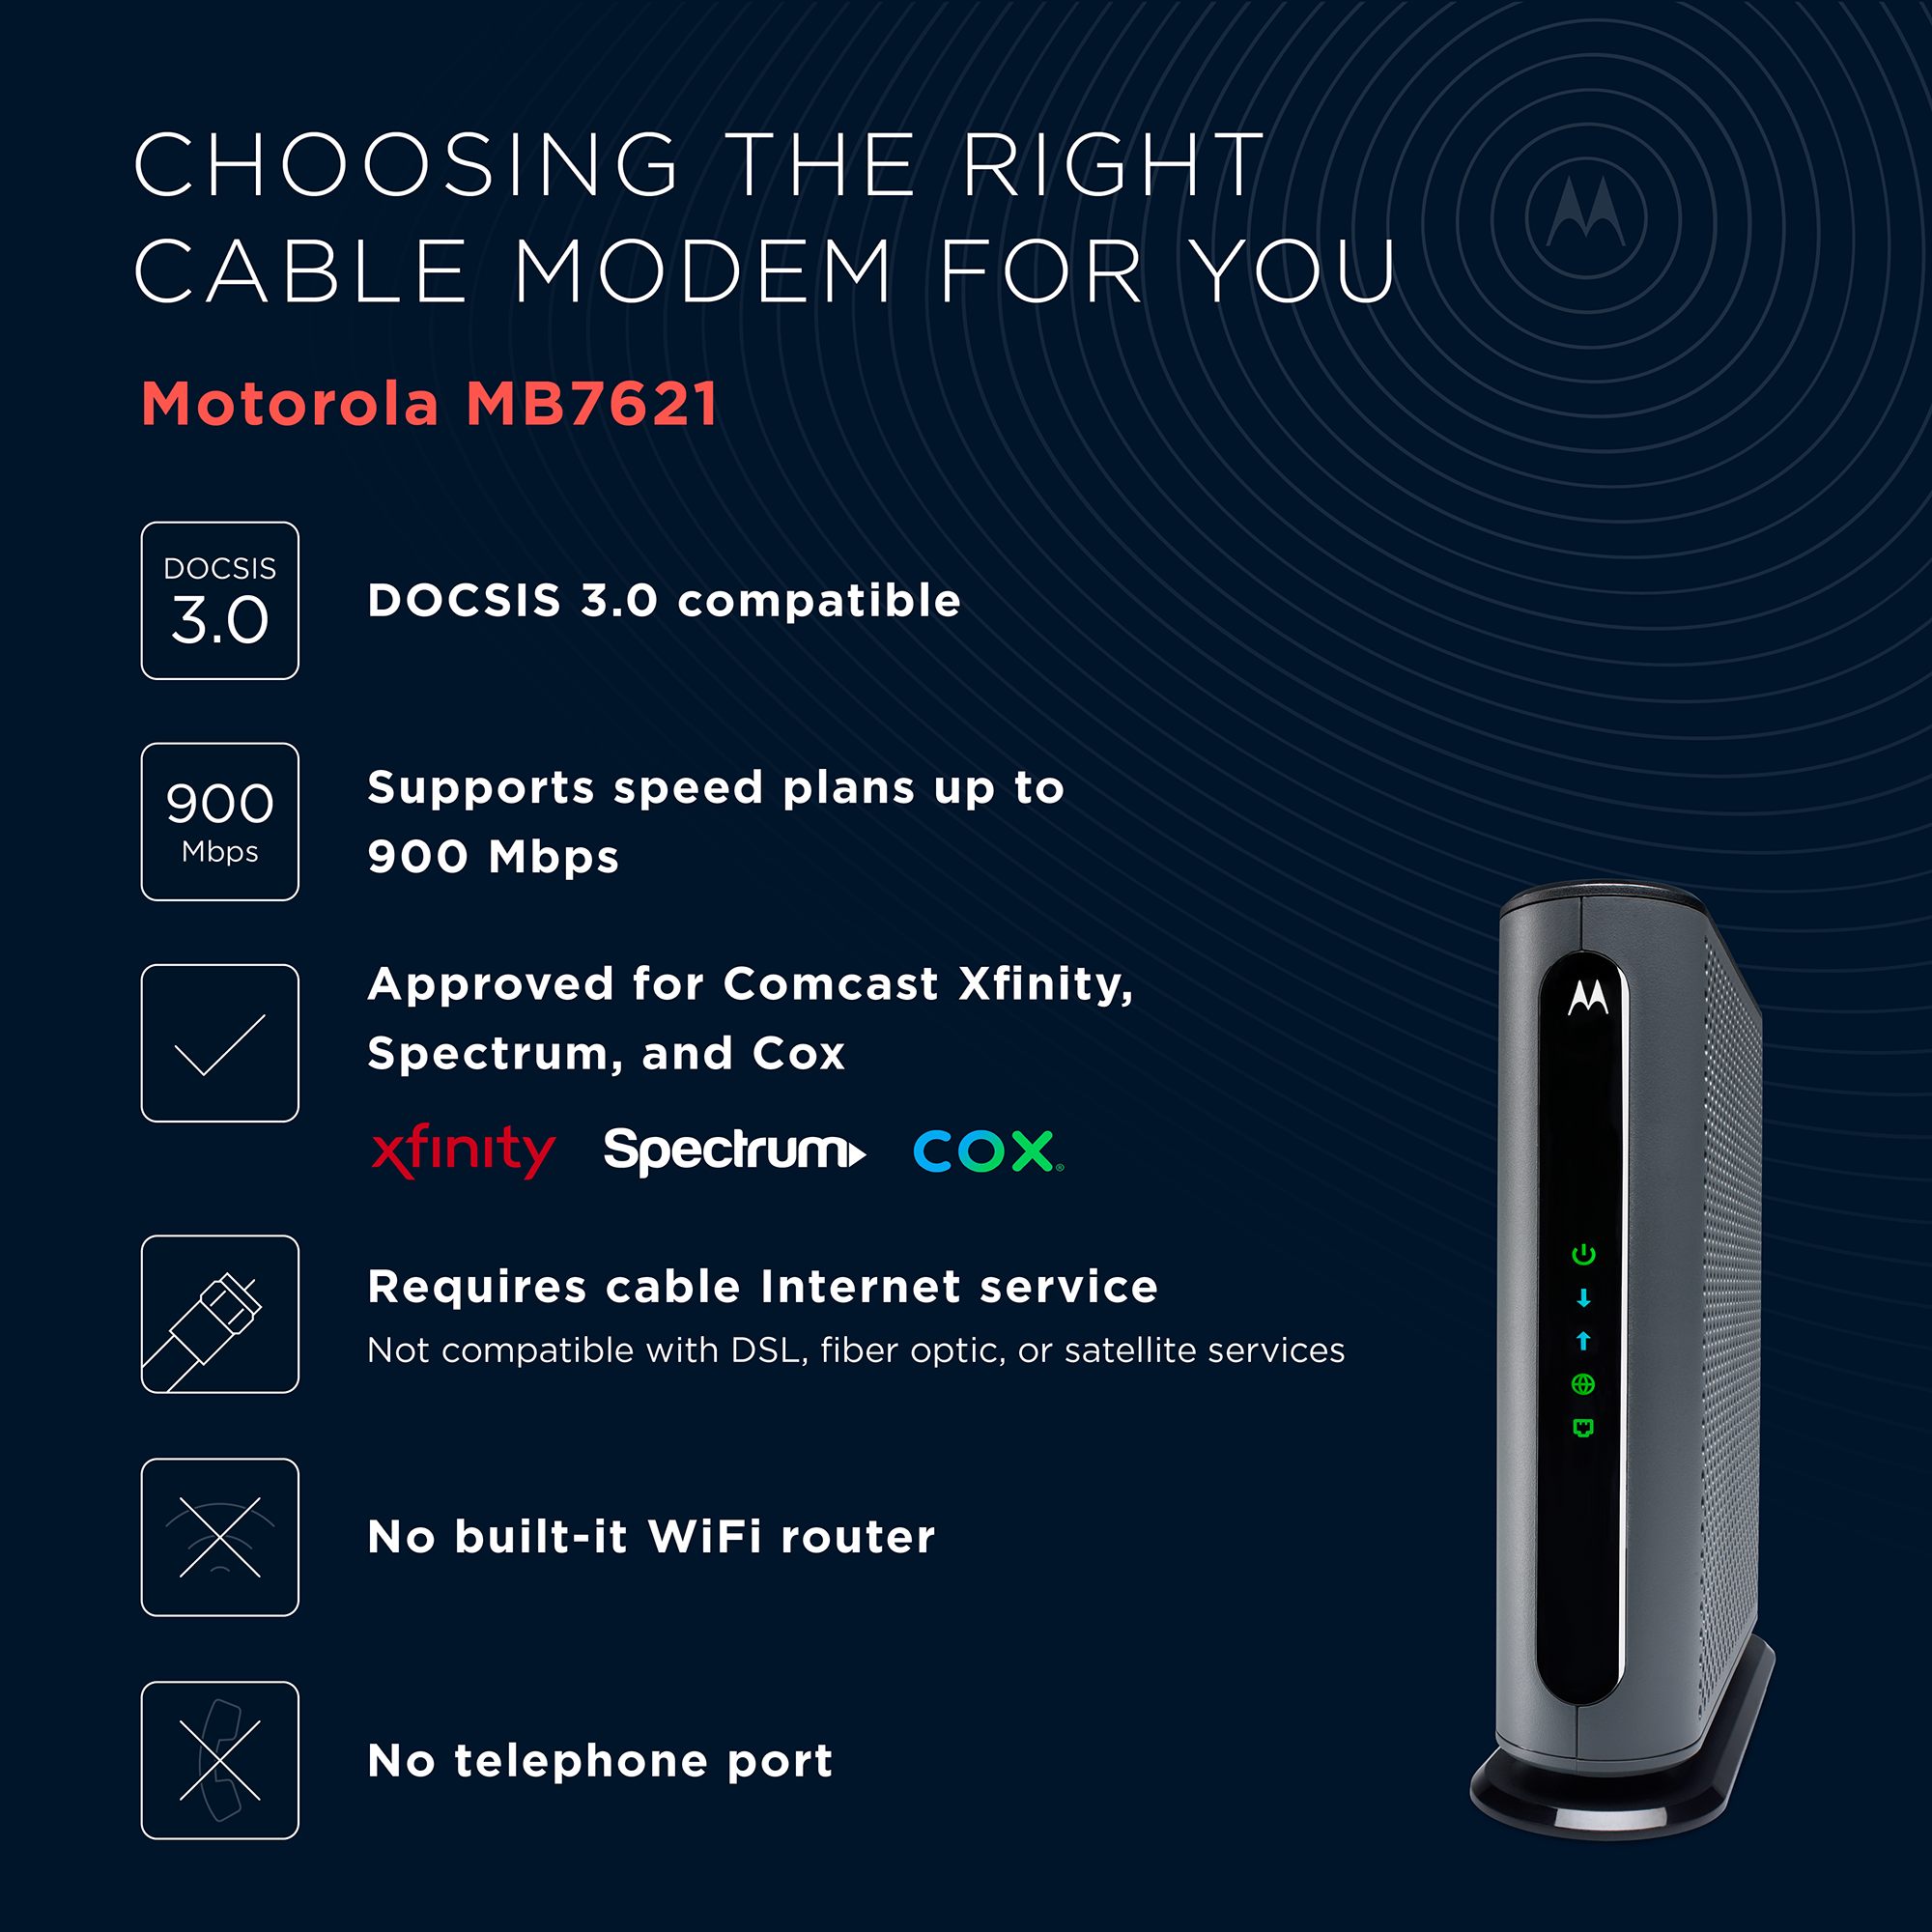 MOTOROLA MB7621 Cable Modem, DOCSIS 3.0 - Pairs with Any Wi-Fi Router | Approved by Comcast Xfinity, Cox, and Spectrum | 1000 Mbps Max Speed - image 3 of 9